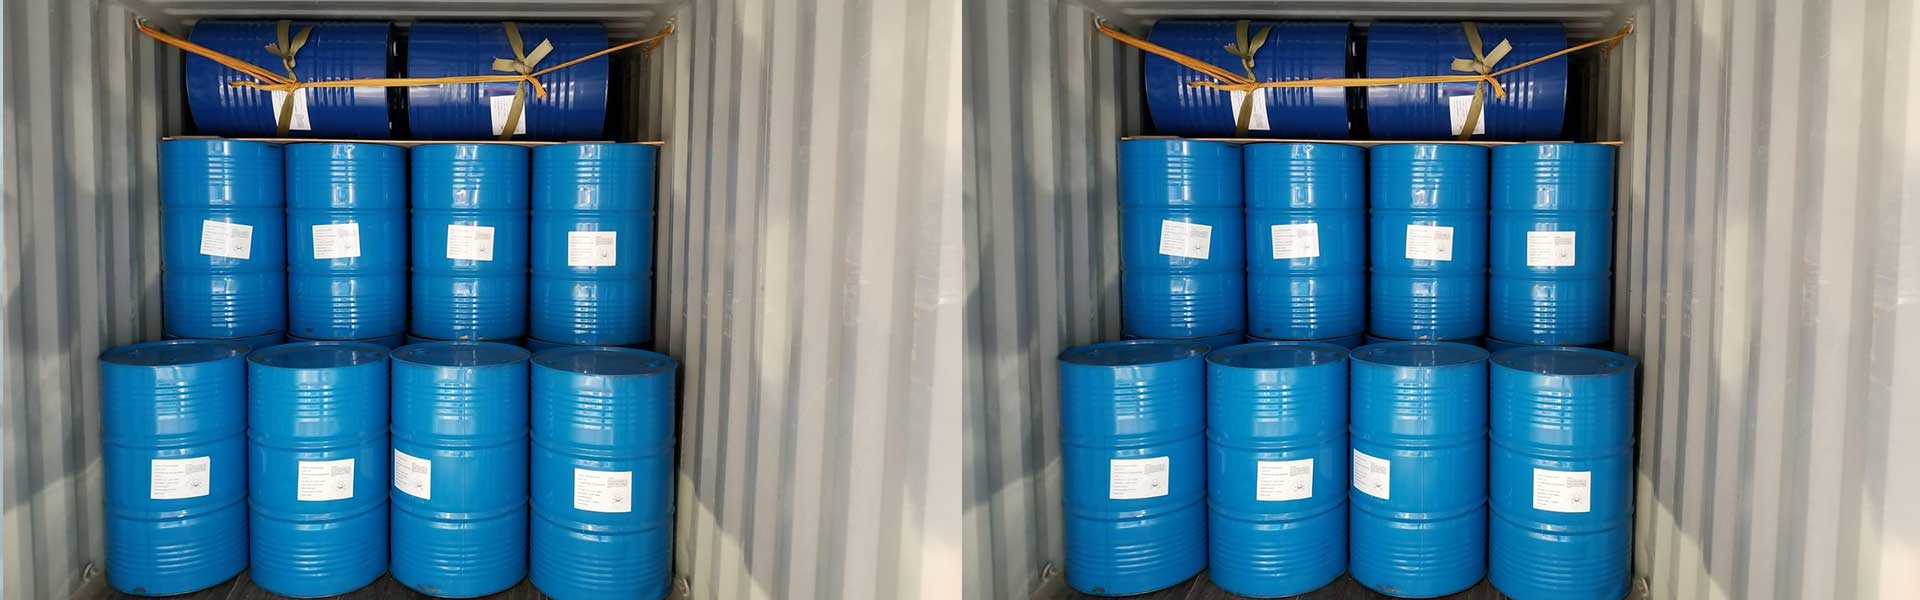 Container Loading and Unloading - barrels